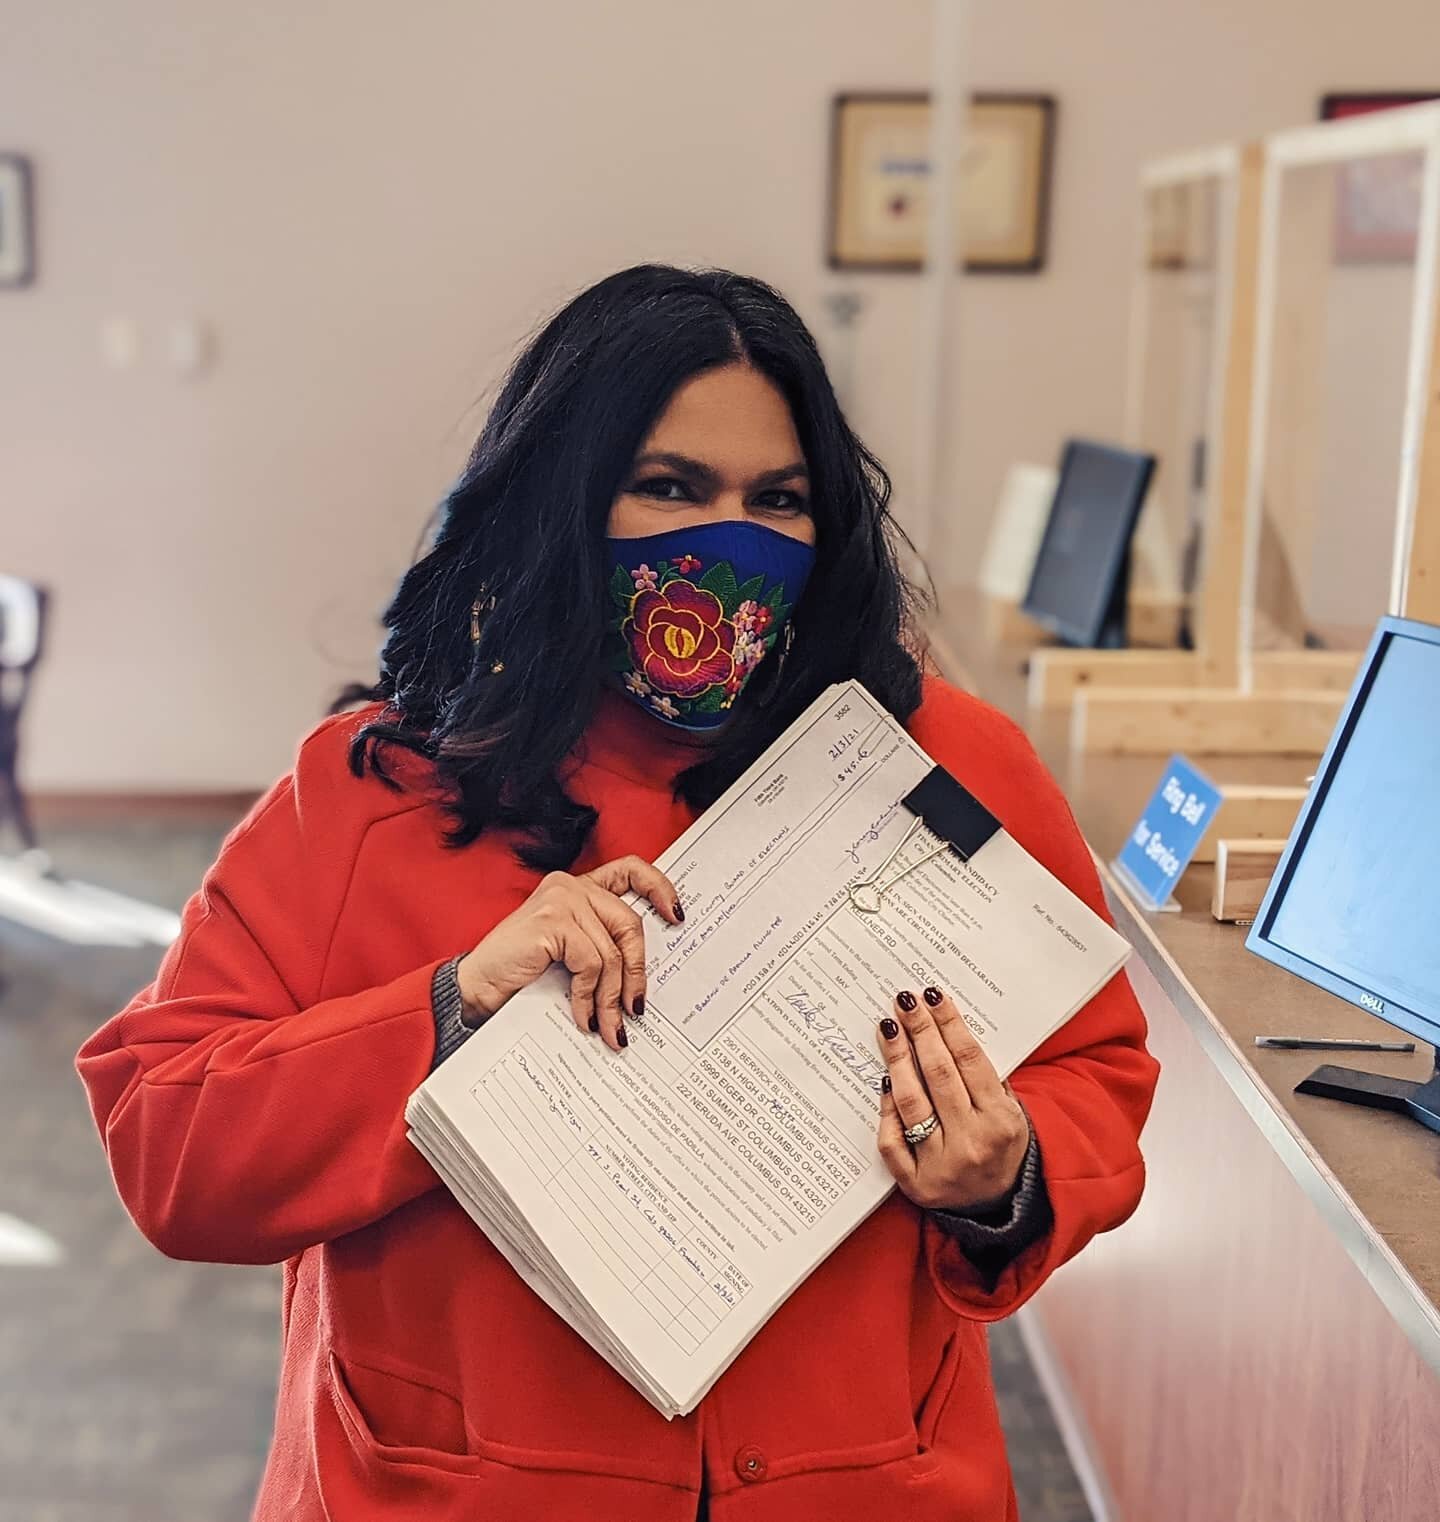 We did it!! Today we submitted 1,632 signatures to the Franklin County Board of Elections. 

This could not have happened without the incredible support of our community-- especially the amazing team of mostly women and women of color who knocked on 